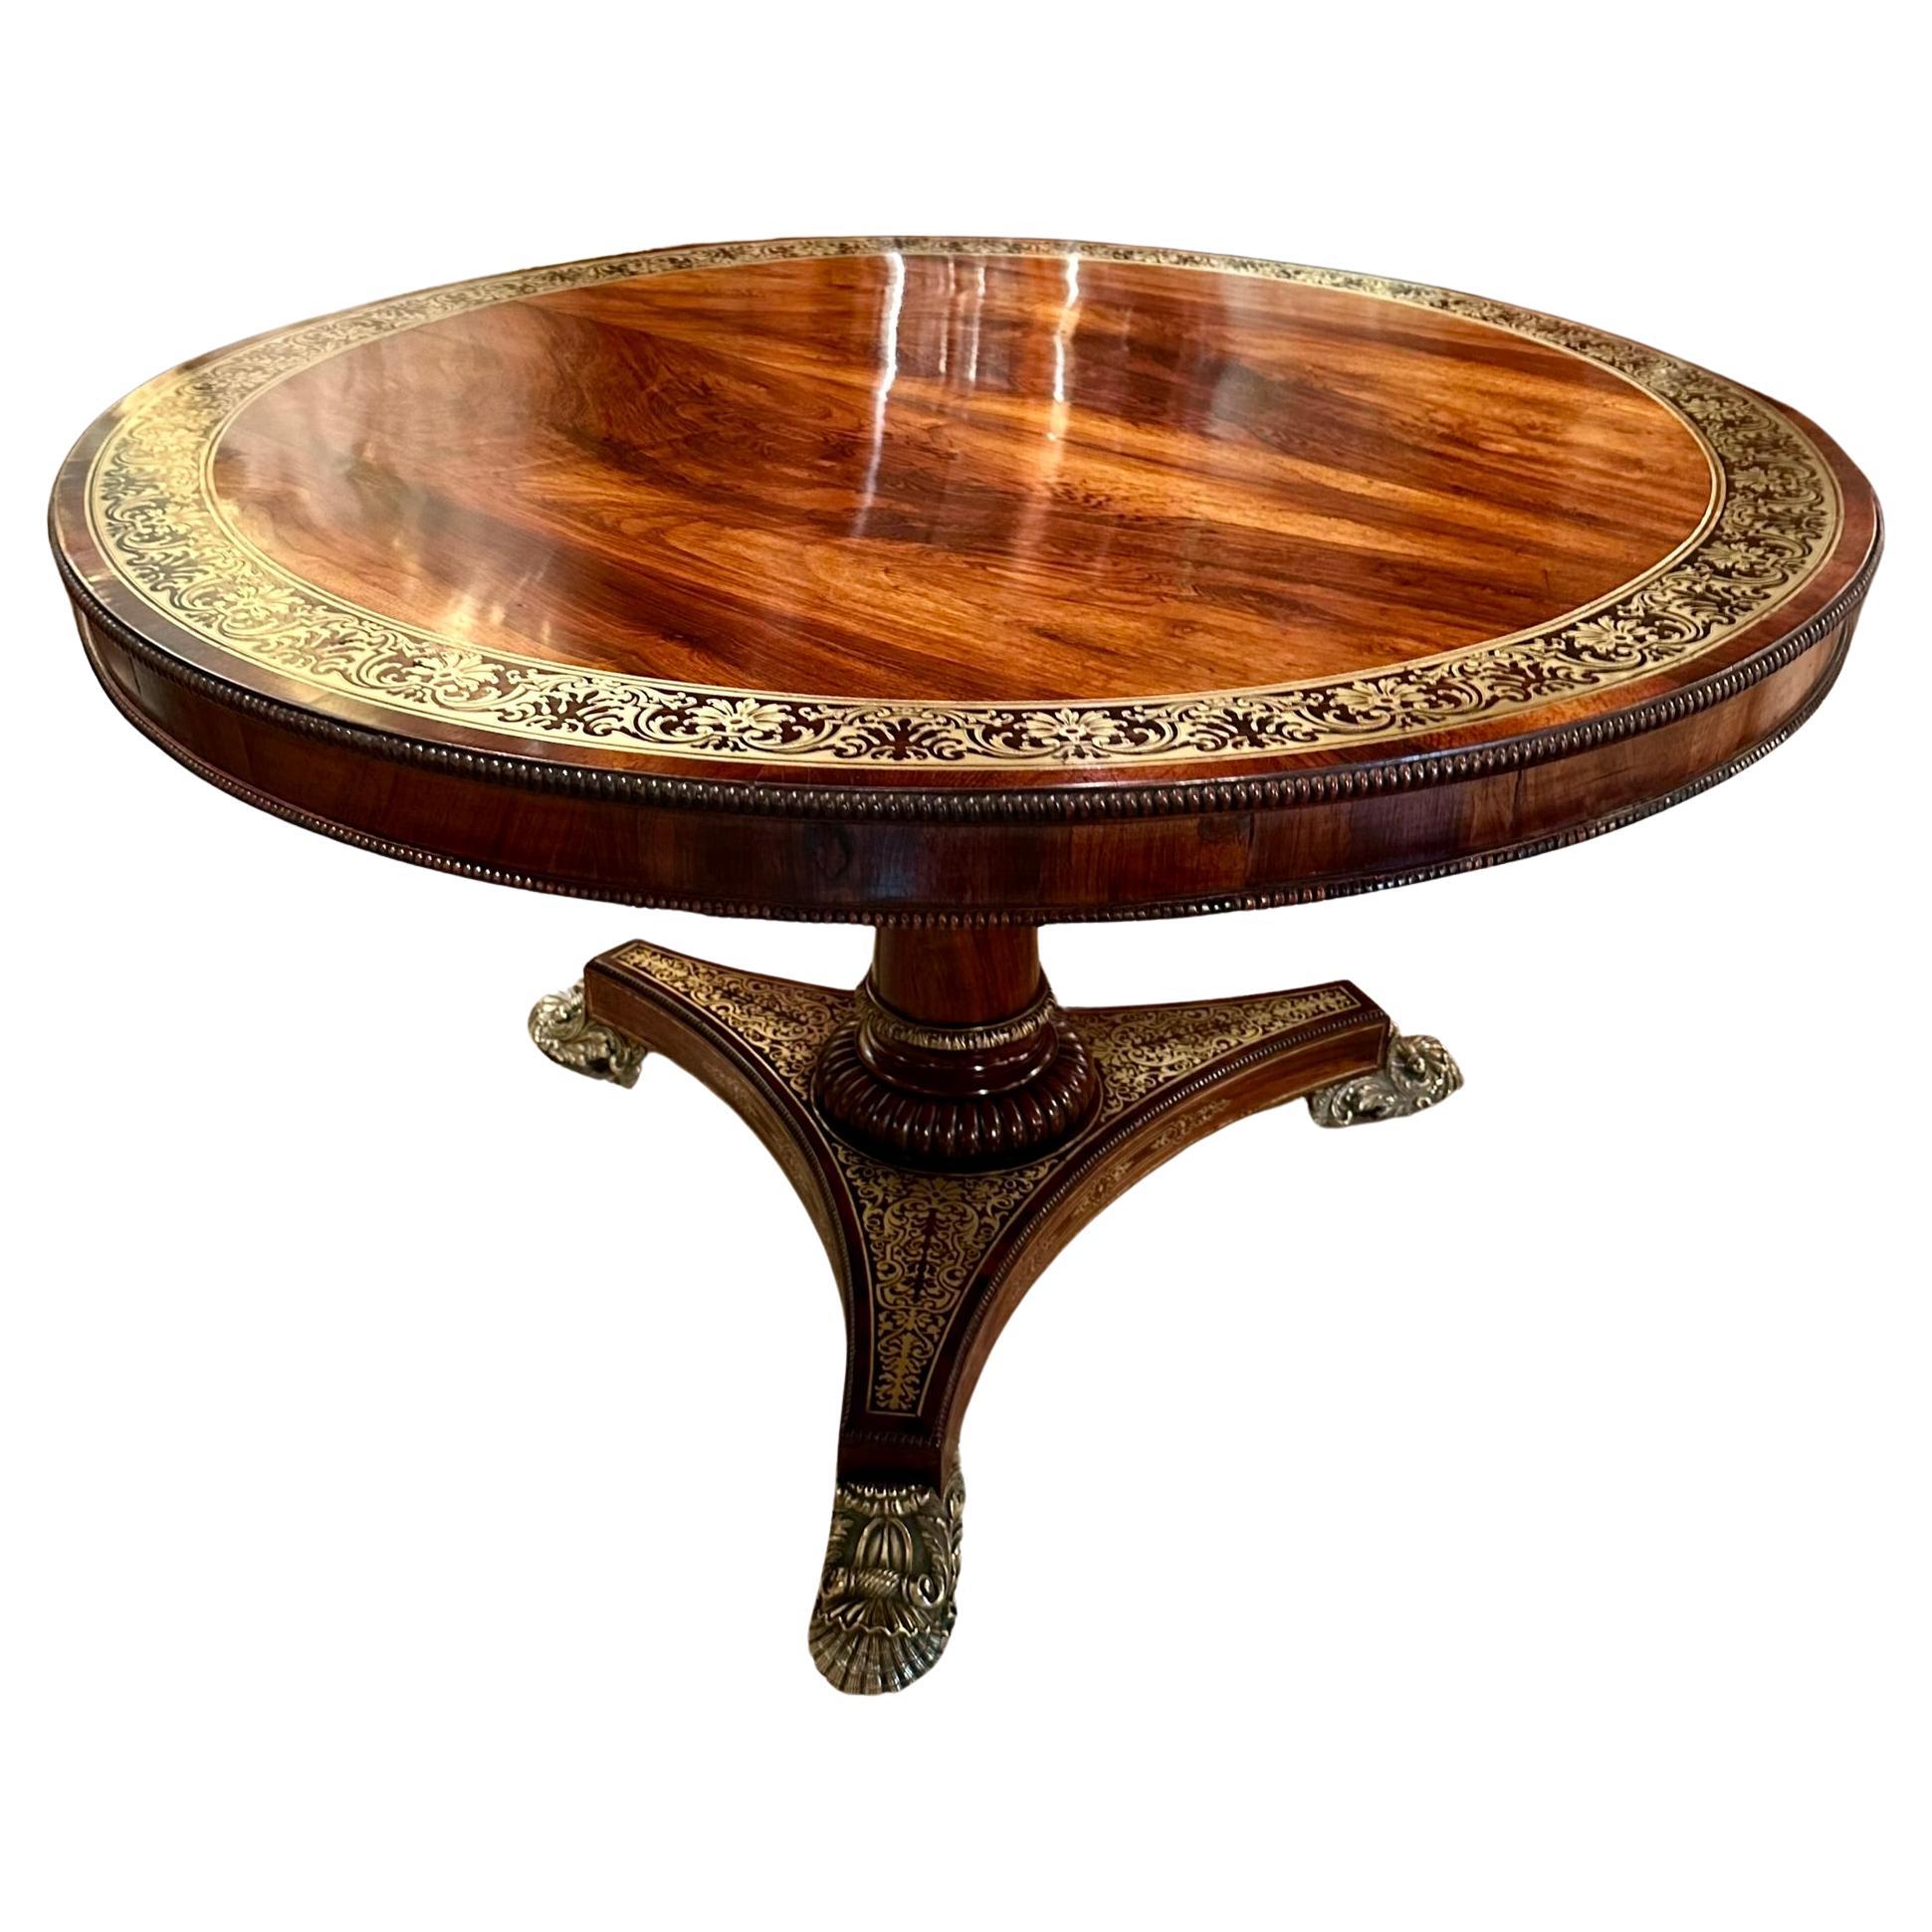 19th Century Antique English Regency Rosewood with Brass Inlay Tilt Top Center Table, Ca 1830 For Sale